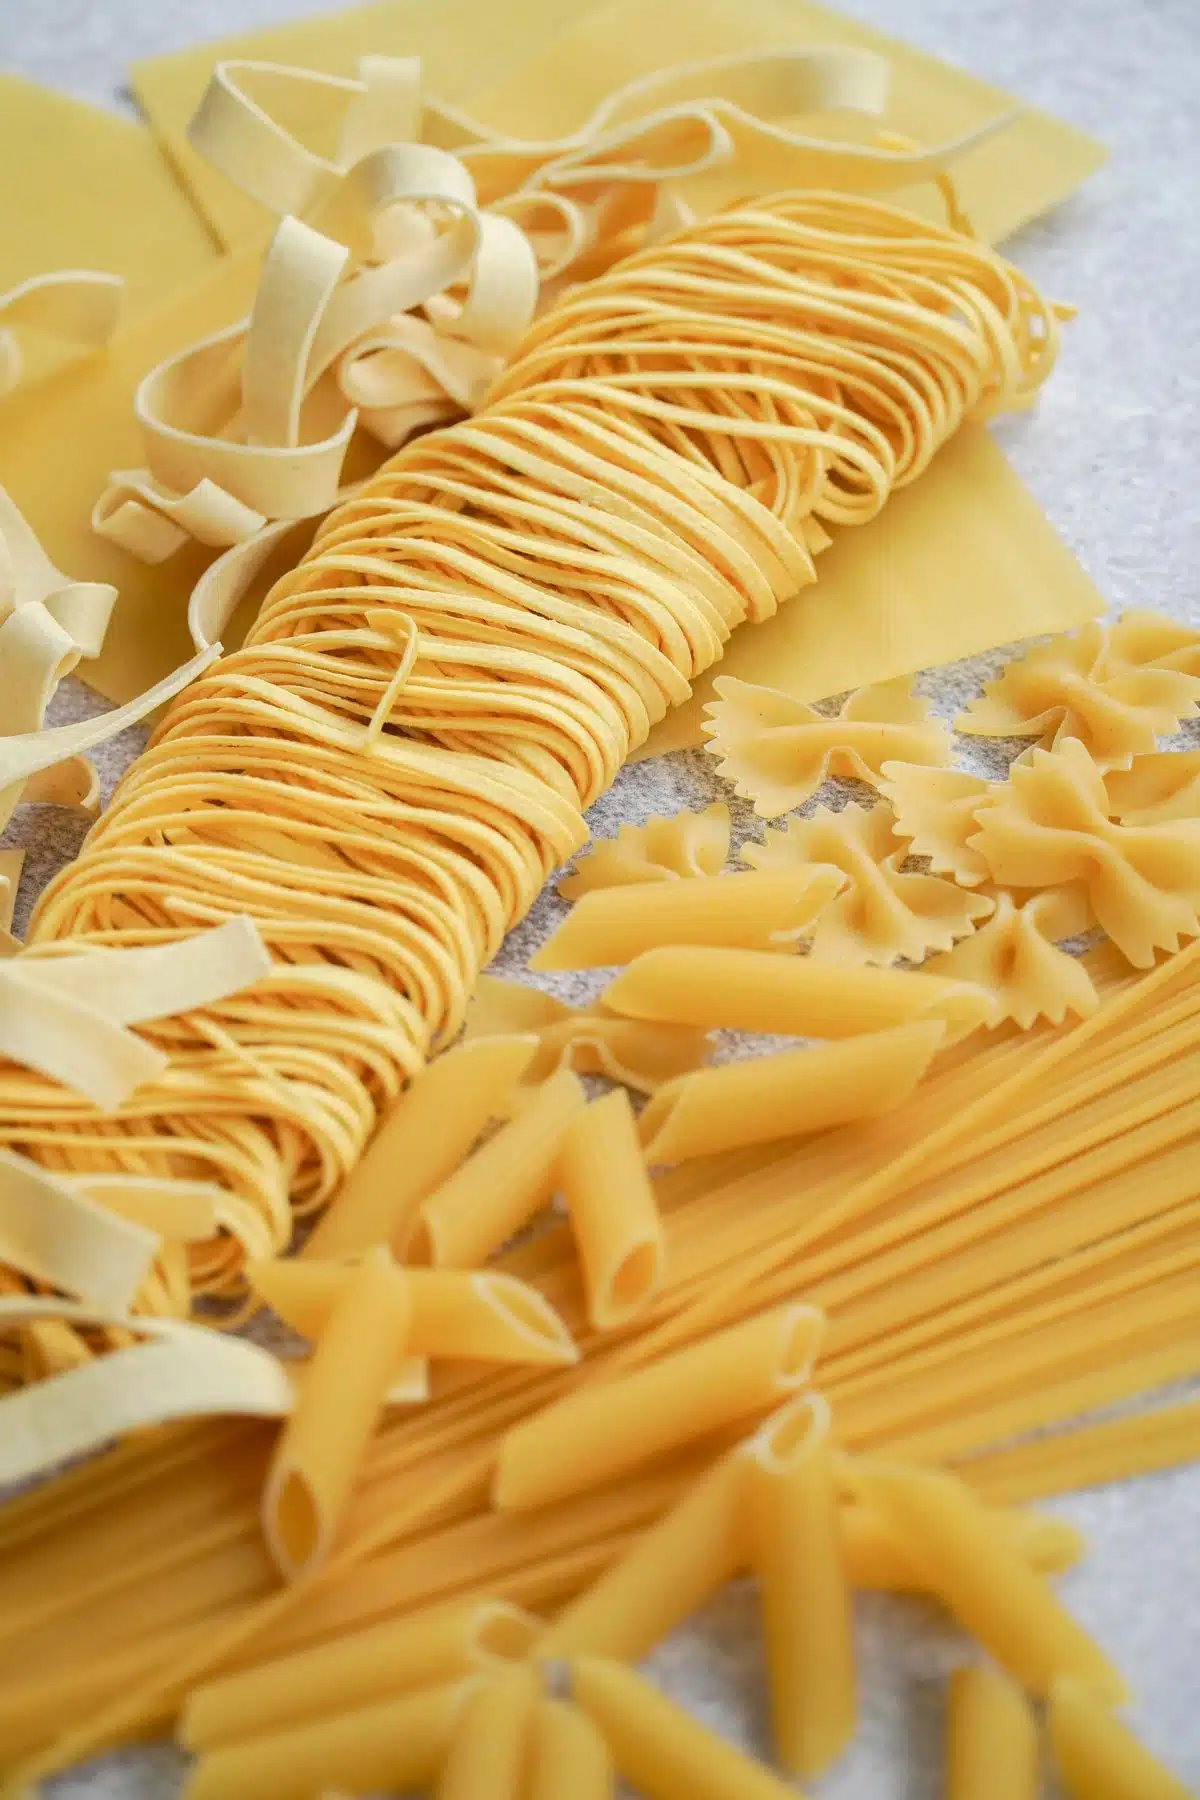 Various shapes of raw pasta have been laid out across a table.